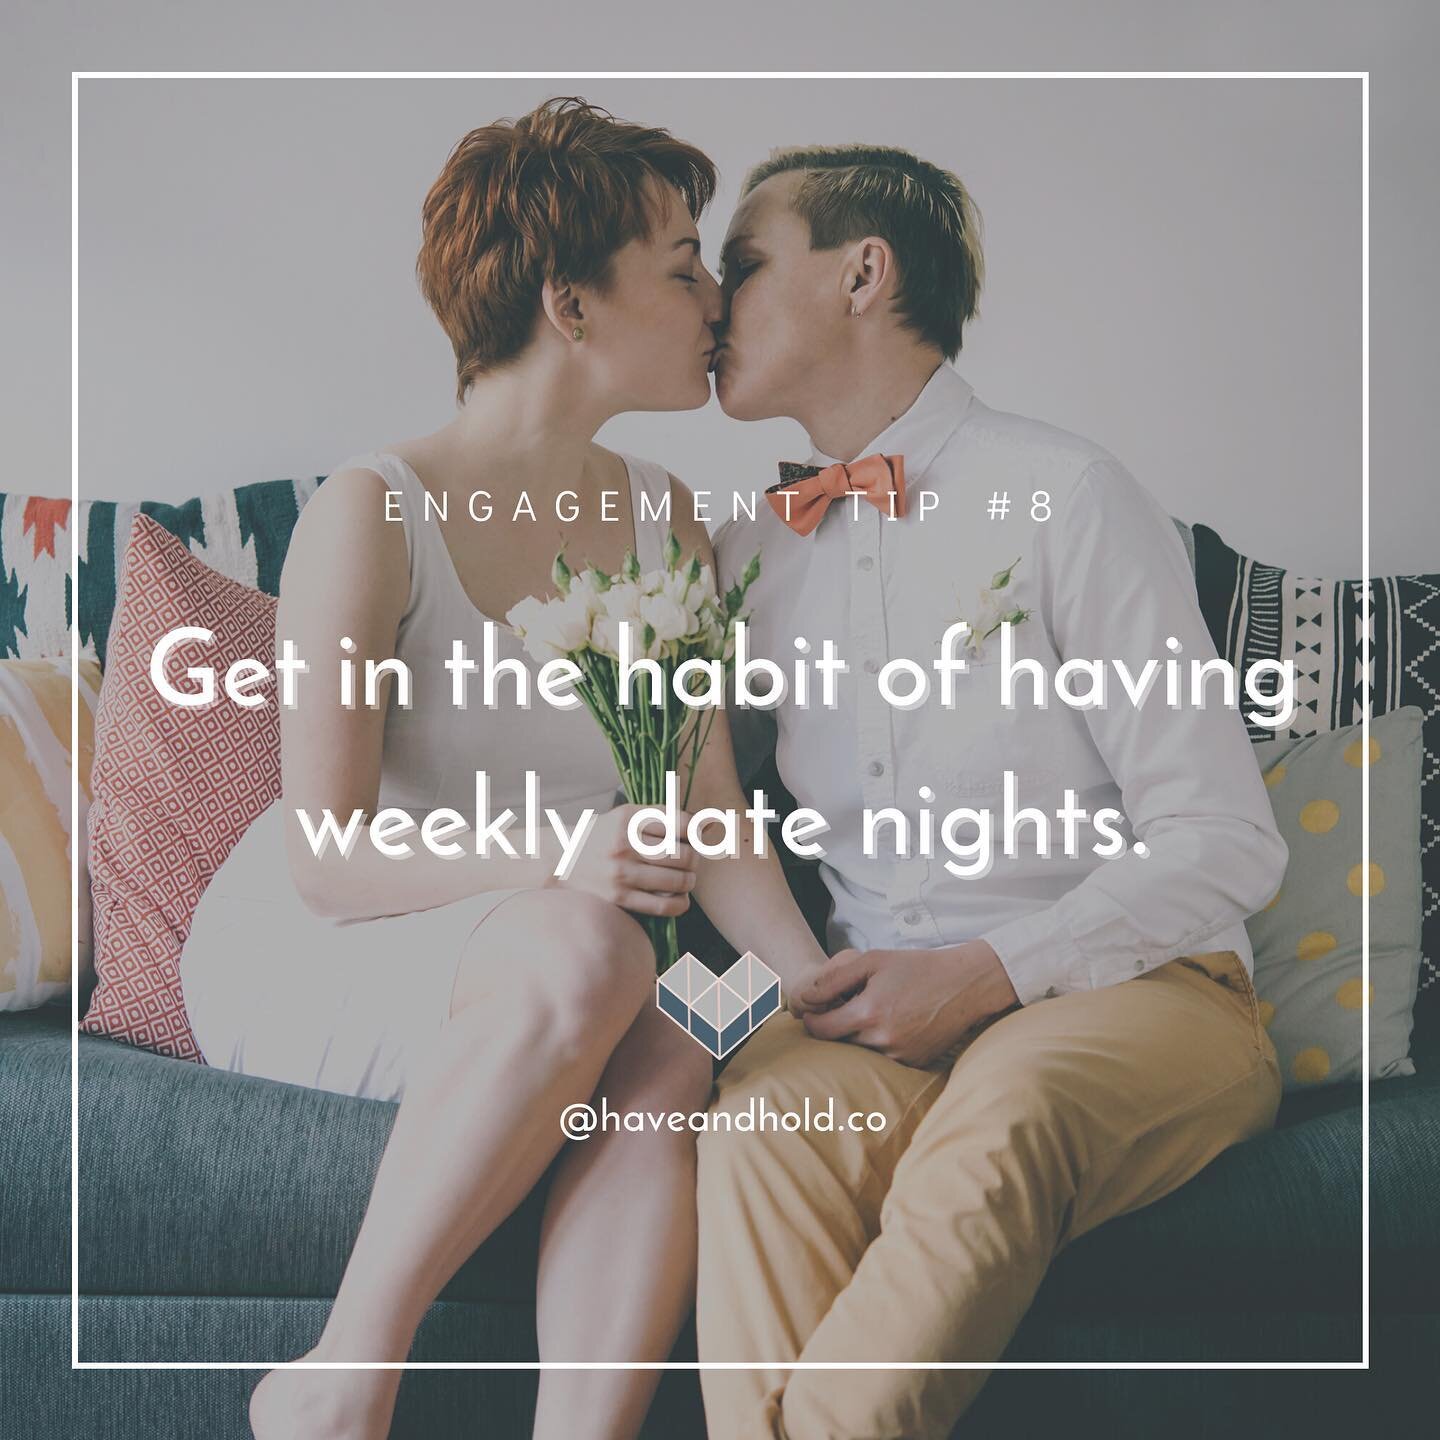 We cannot say this enough. Weekly dates are underrated, especially in covid times when going out isn&rsquo;t what it used to be. 

Because here&rsquo;s the thing... after you&rsquo;ve been together for a while, we fall into a routine &mdash; and with